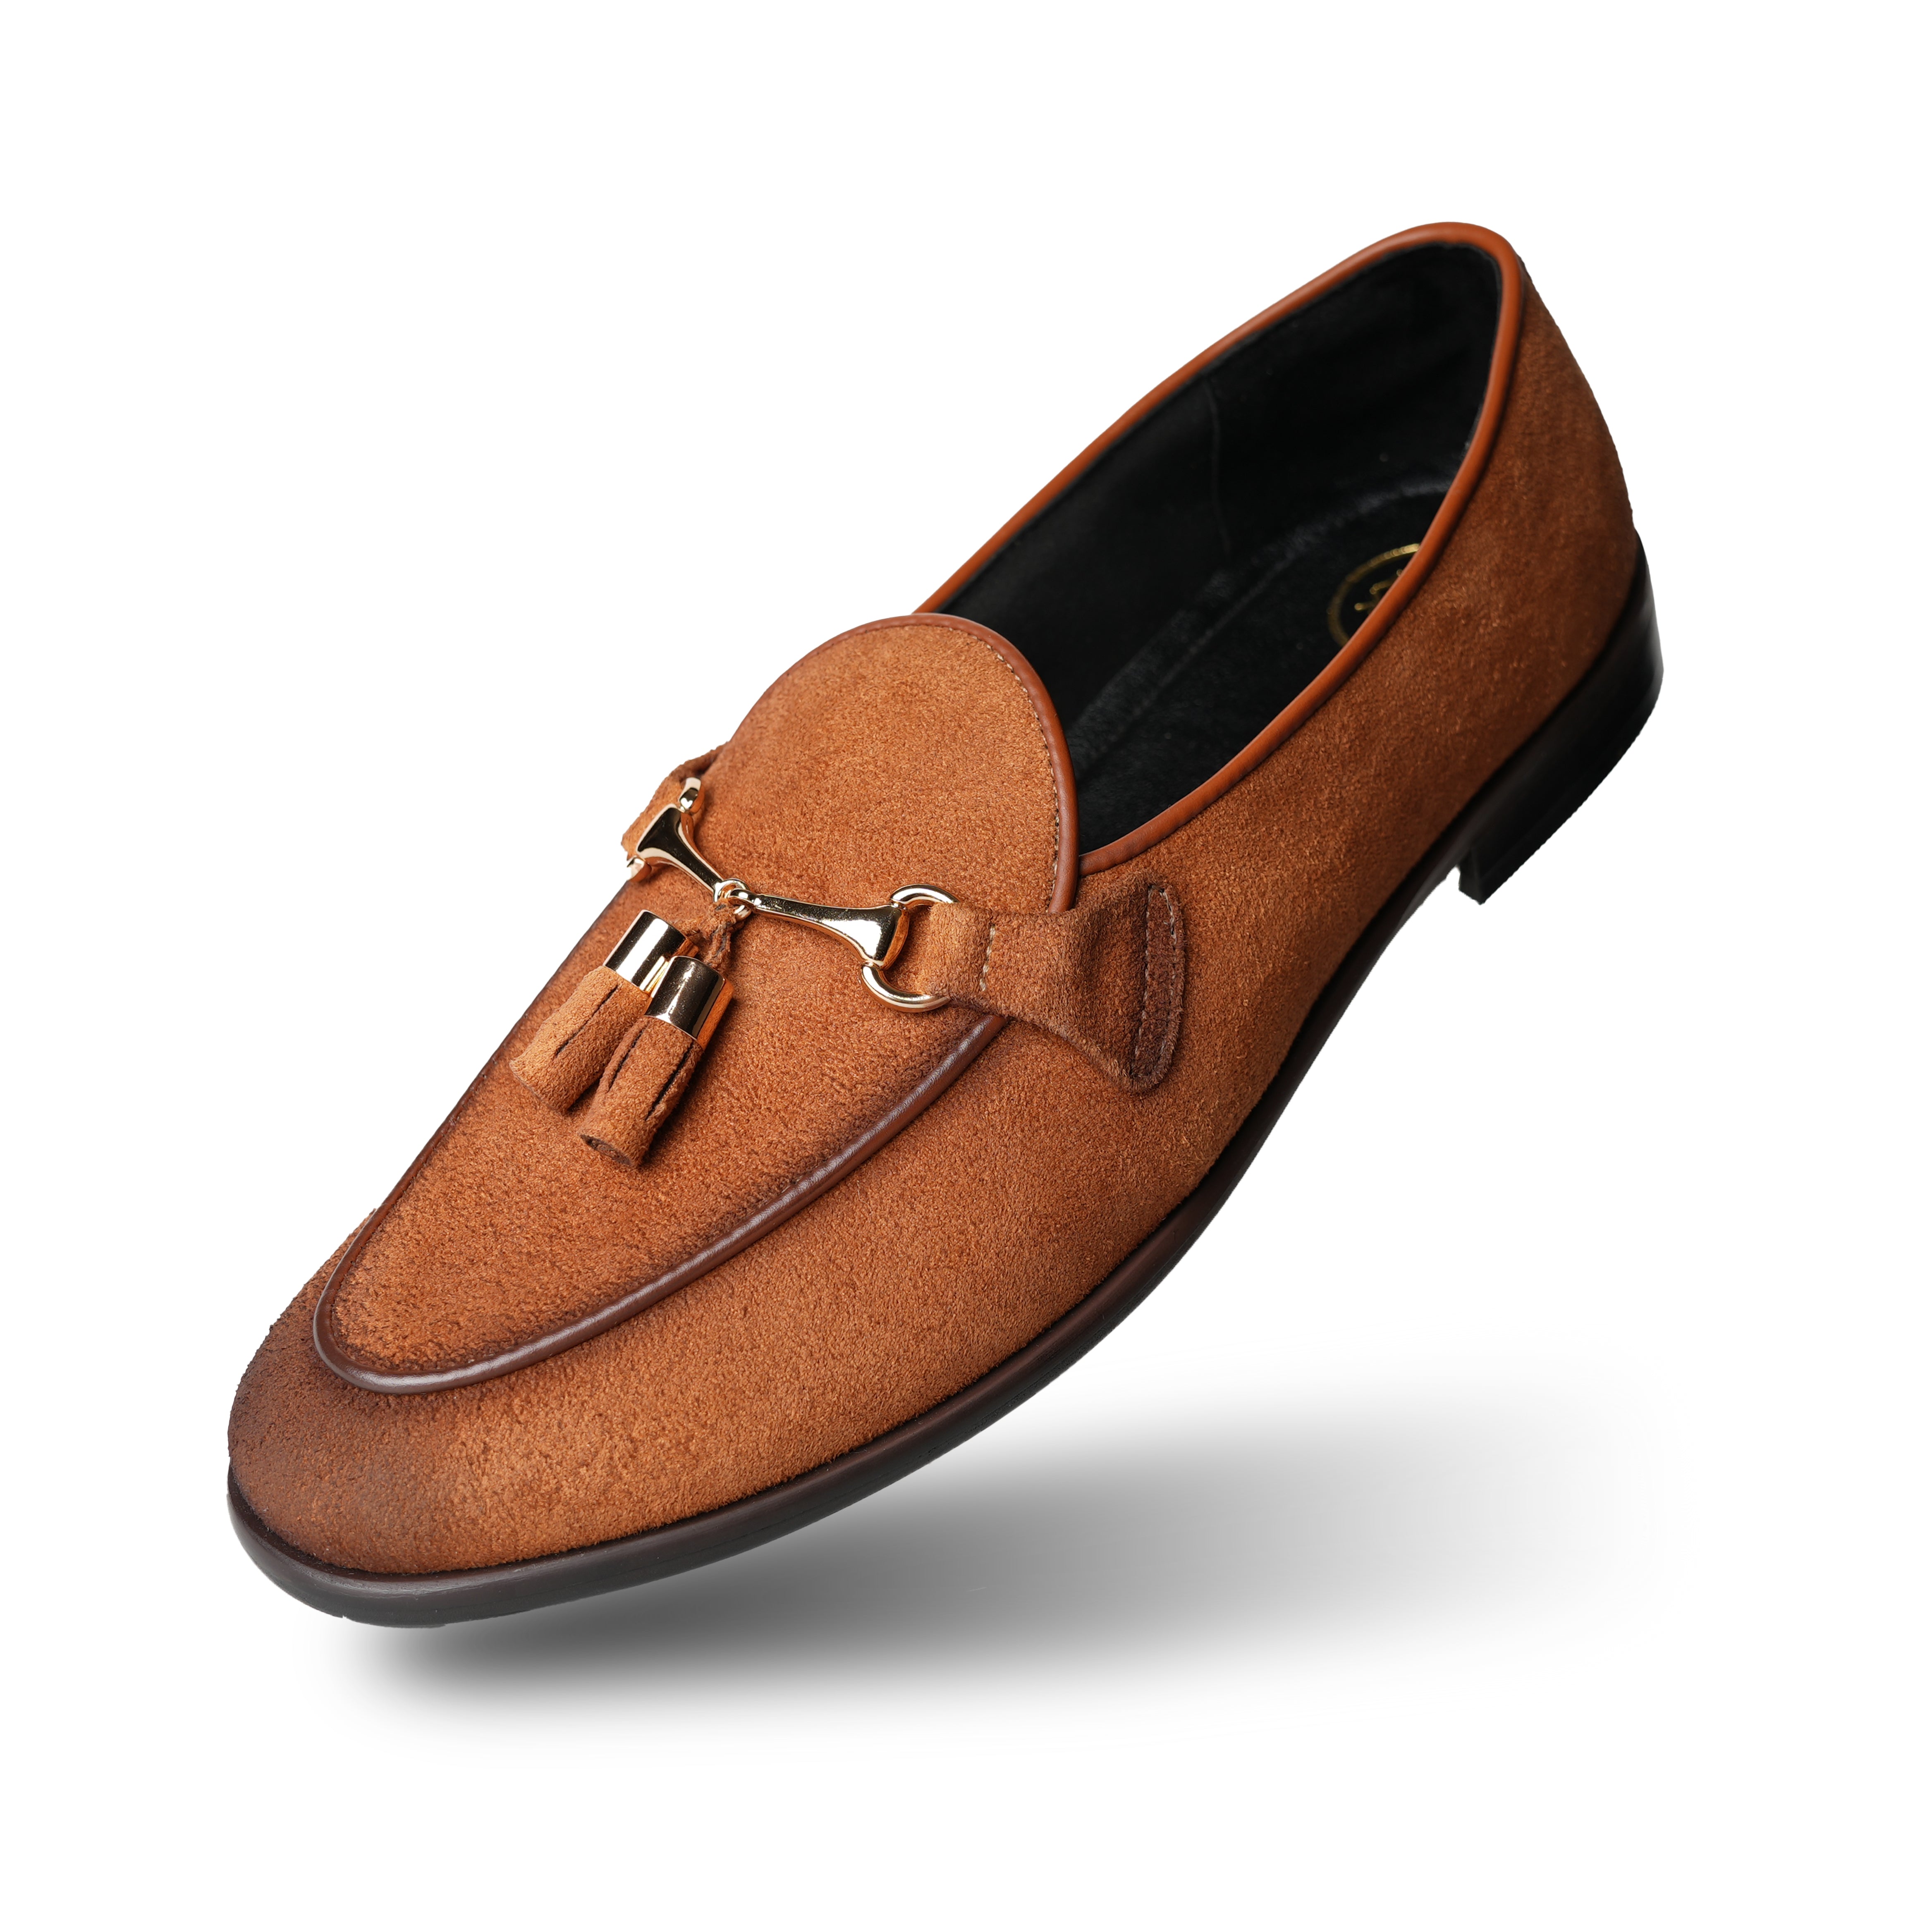 A rustic tan suede loafer, Monkstory Horse-bit Tasseled Slip-Ons - Rustic Tan, with timeless elegance.